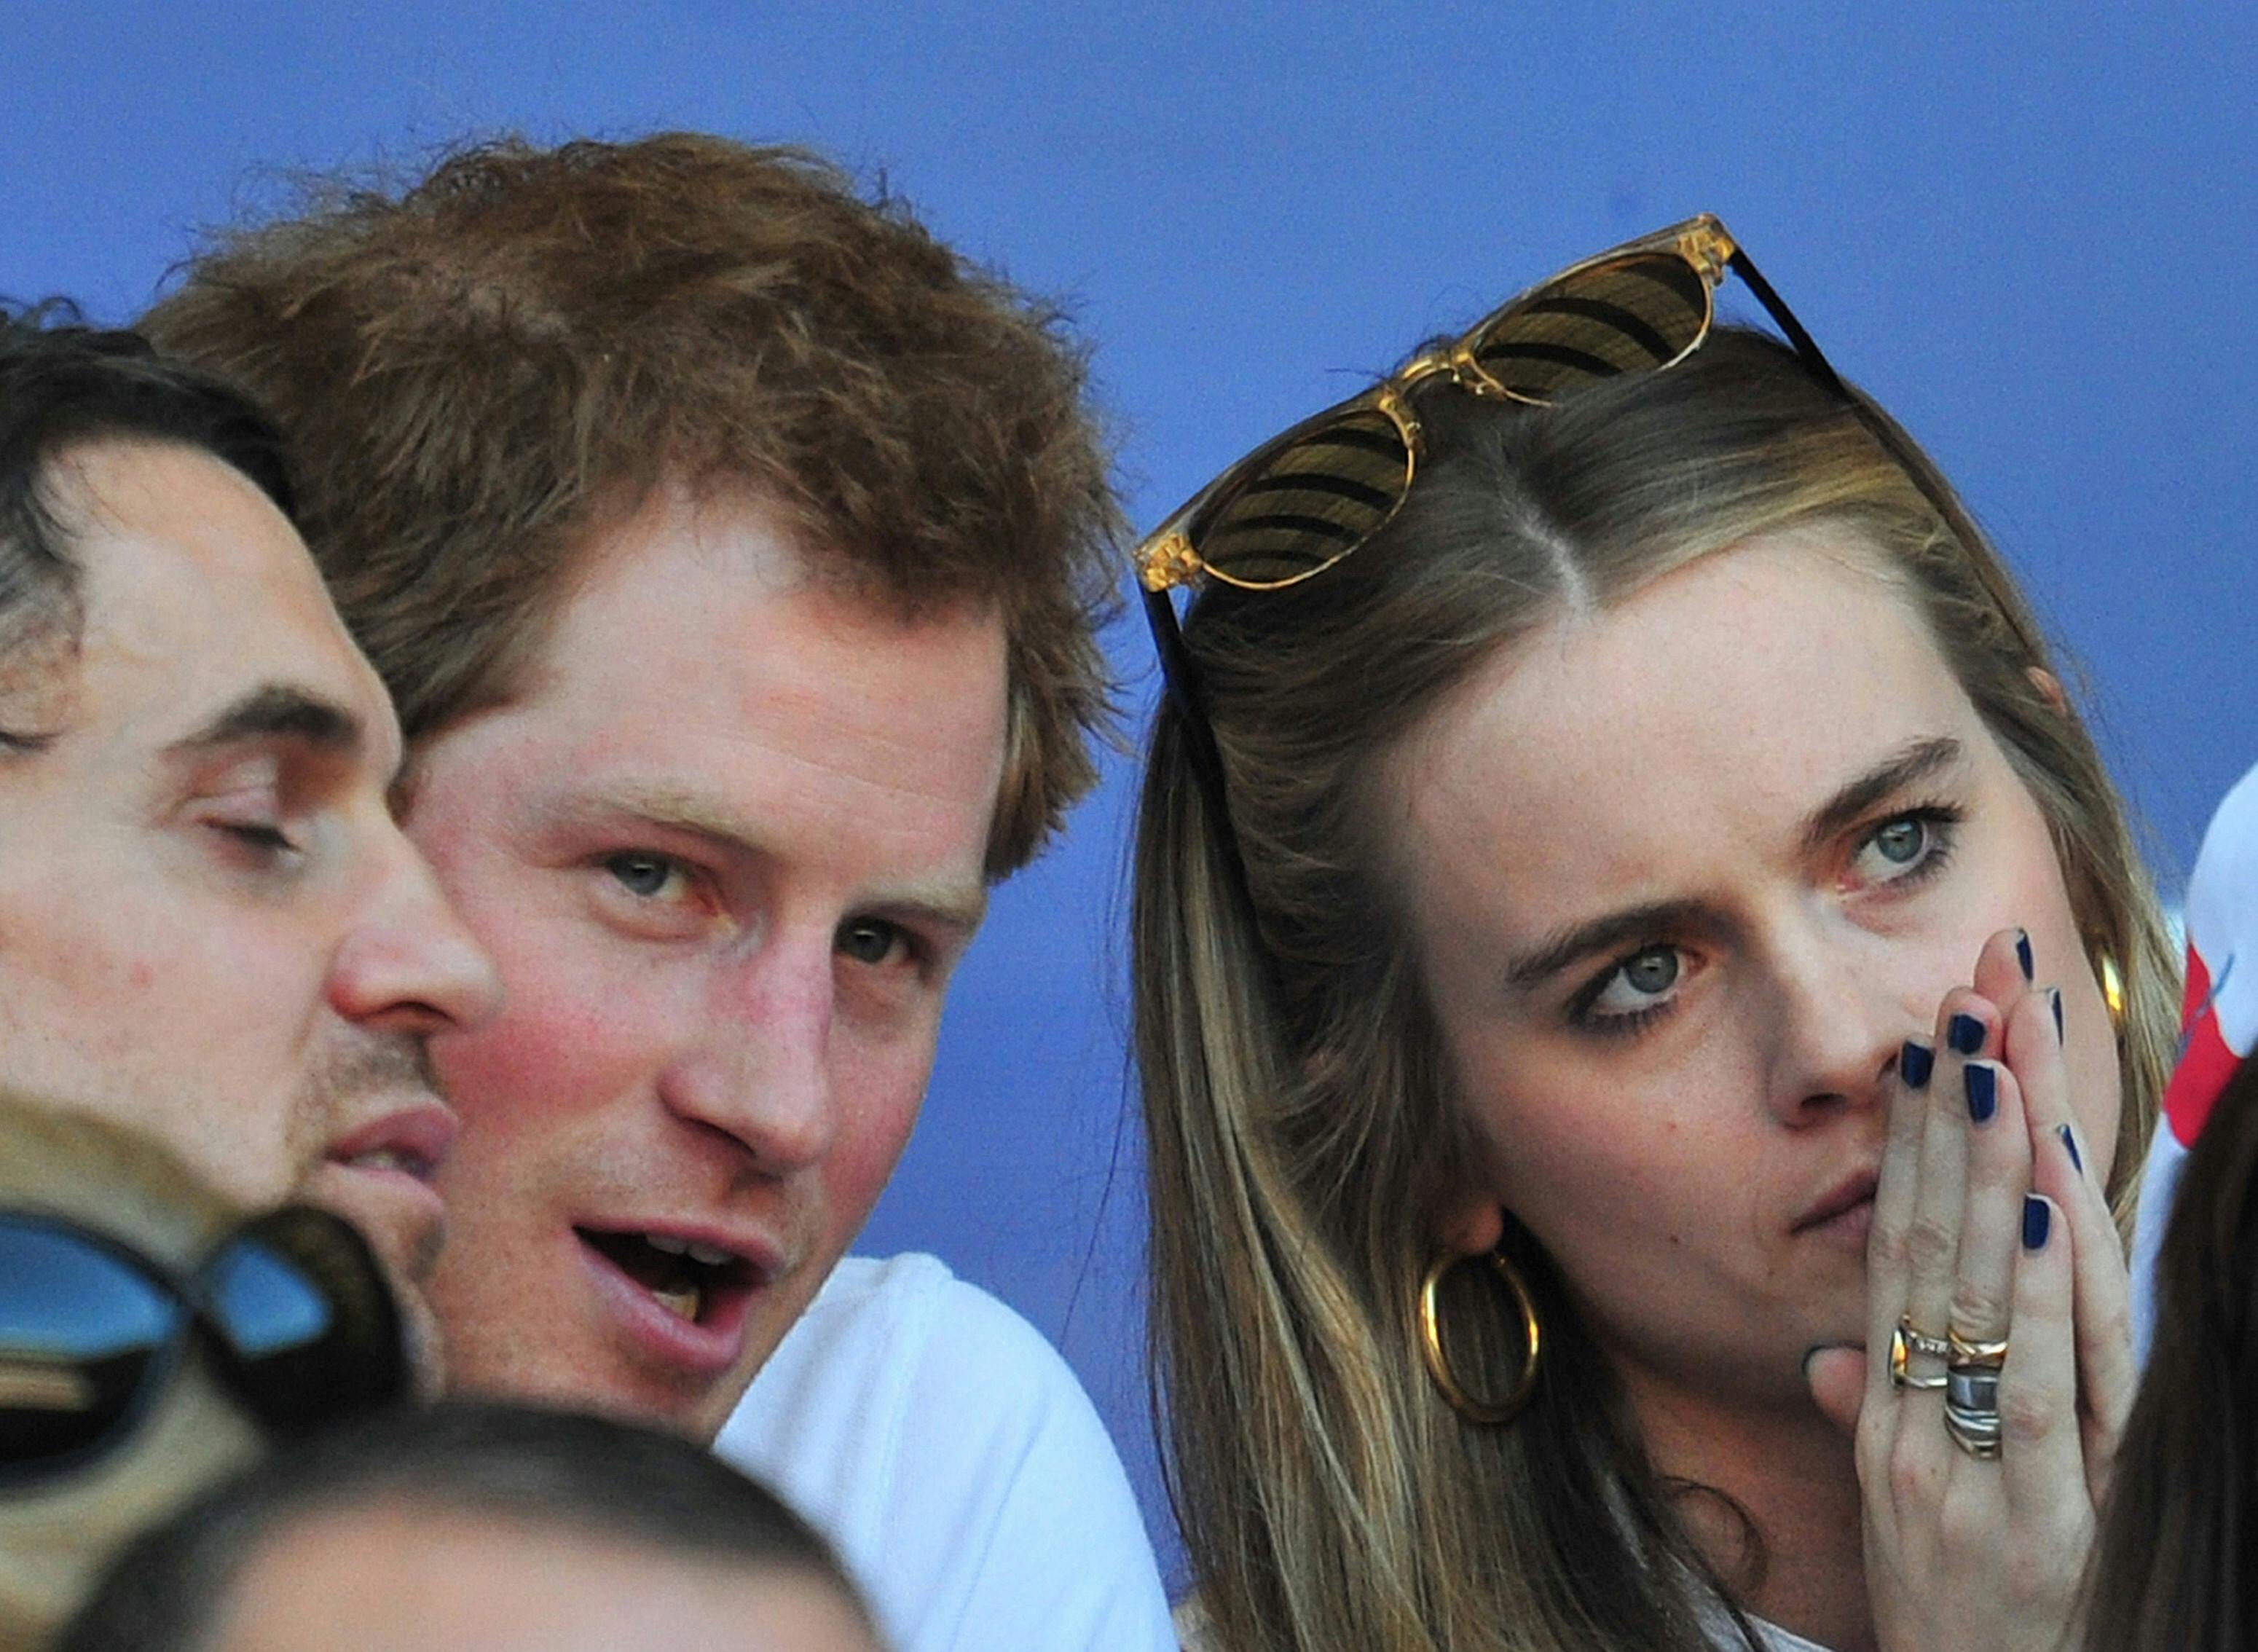 (FILES) A file picture taken in London on March 9, 2014, shows Britain's Prince Harry (L) and Cressida Bonas watching a Six Nations International rugby union match between England and Wales at Twickenham. Prince Harry and his girlfriend of nearly two years, Cressida Bonas, have split up, Britain's Daily Telegraph and US magazine People reported Tuesday April 29, 2014. AFP PHOTO / GLYN KIRK/FILES